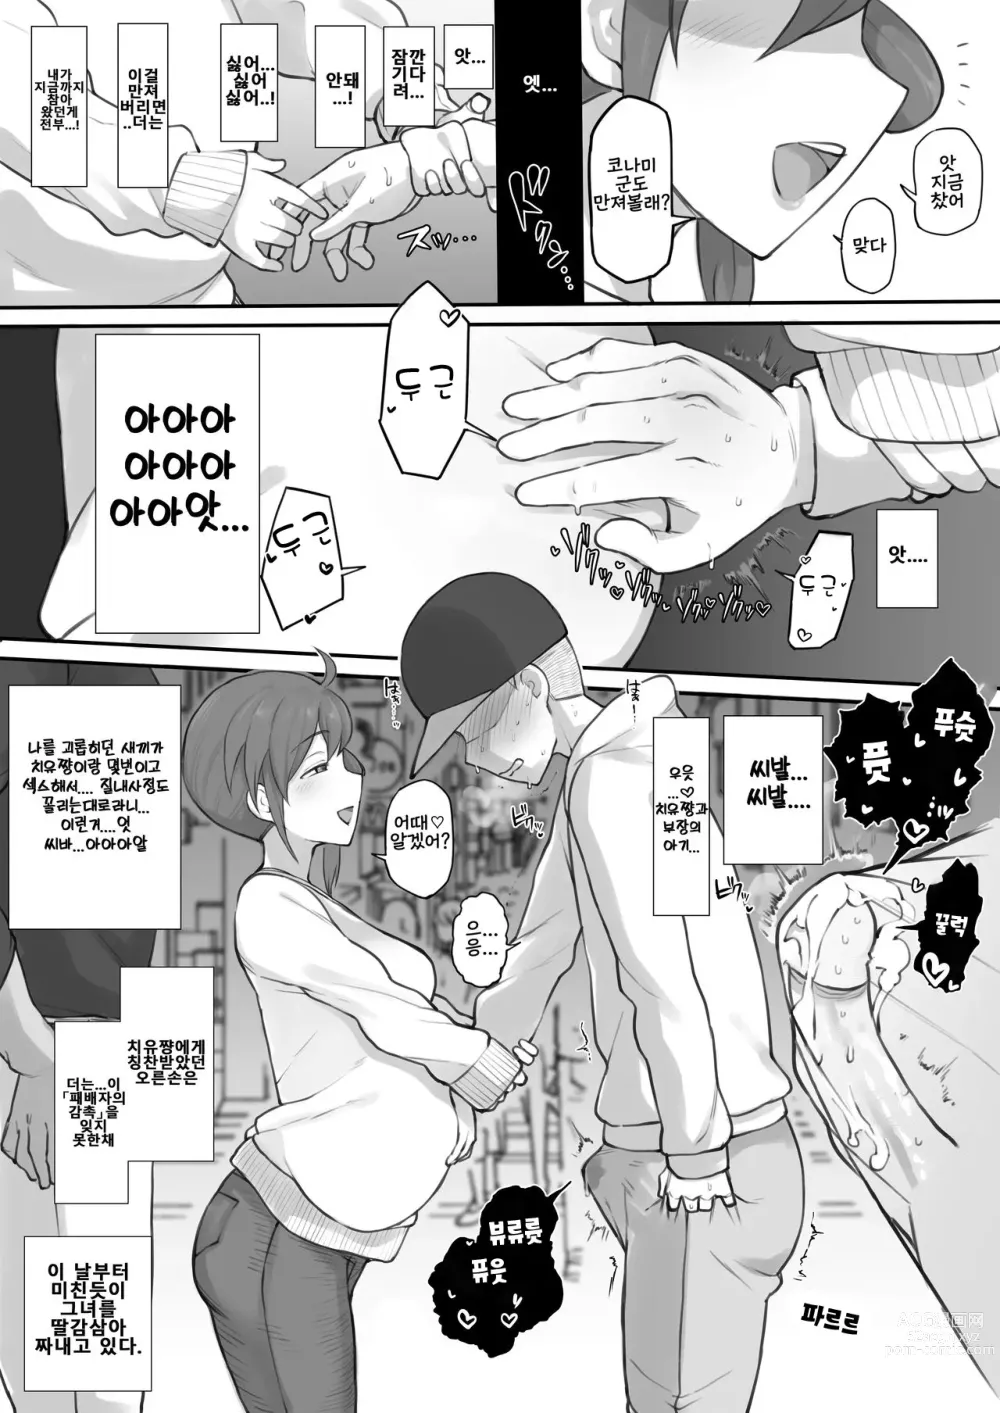 Page 8 of doujinshi Untitled BSS Comics (decensored)